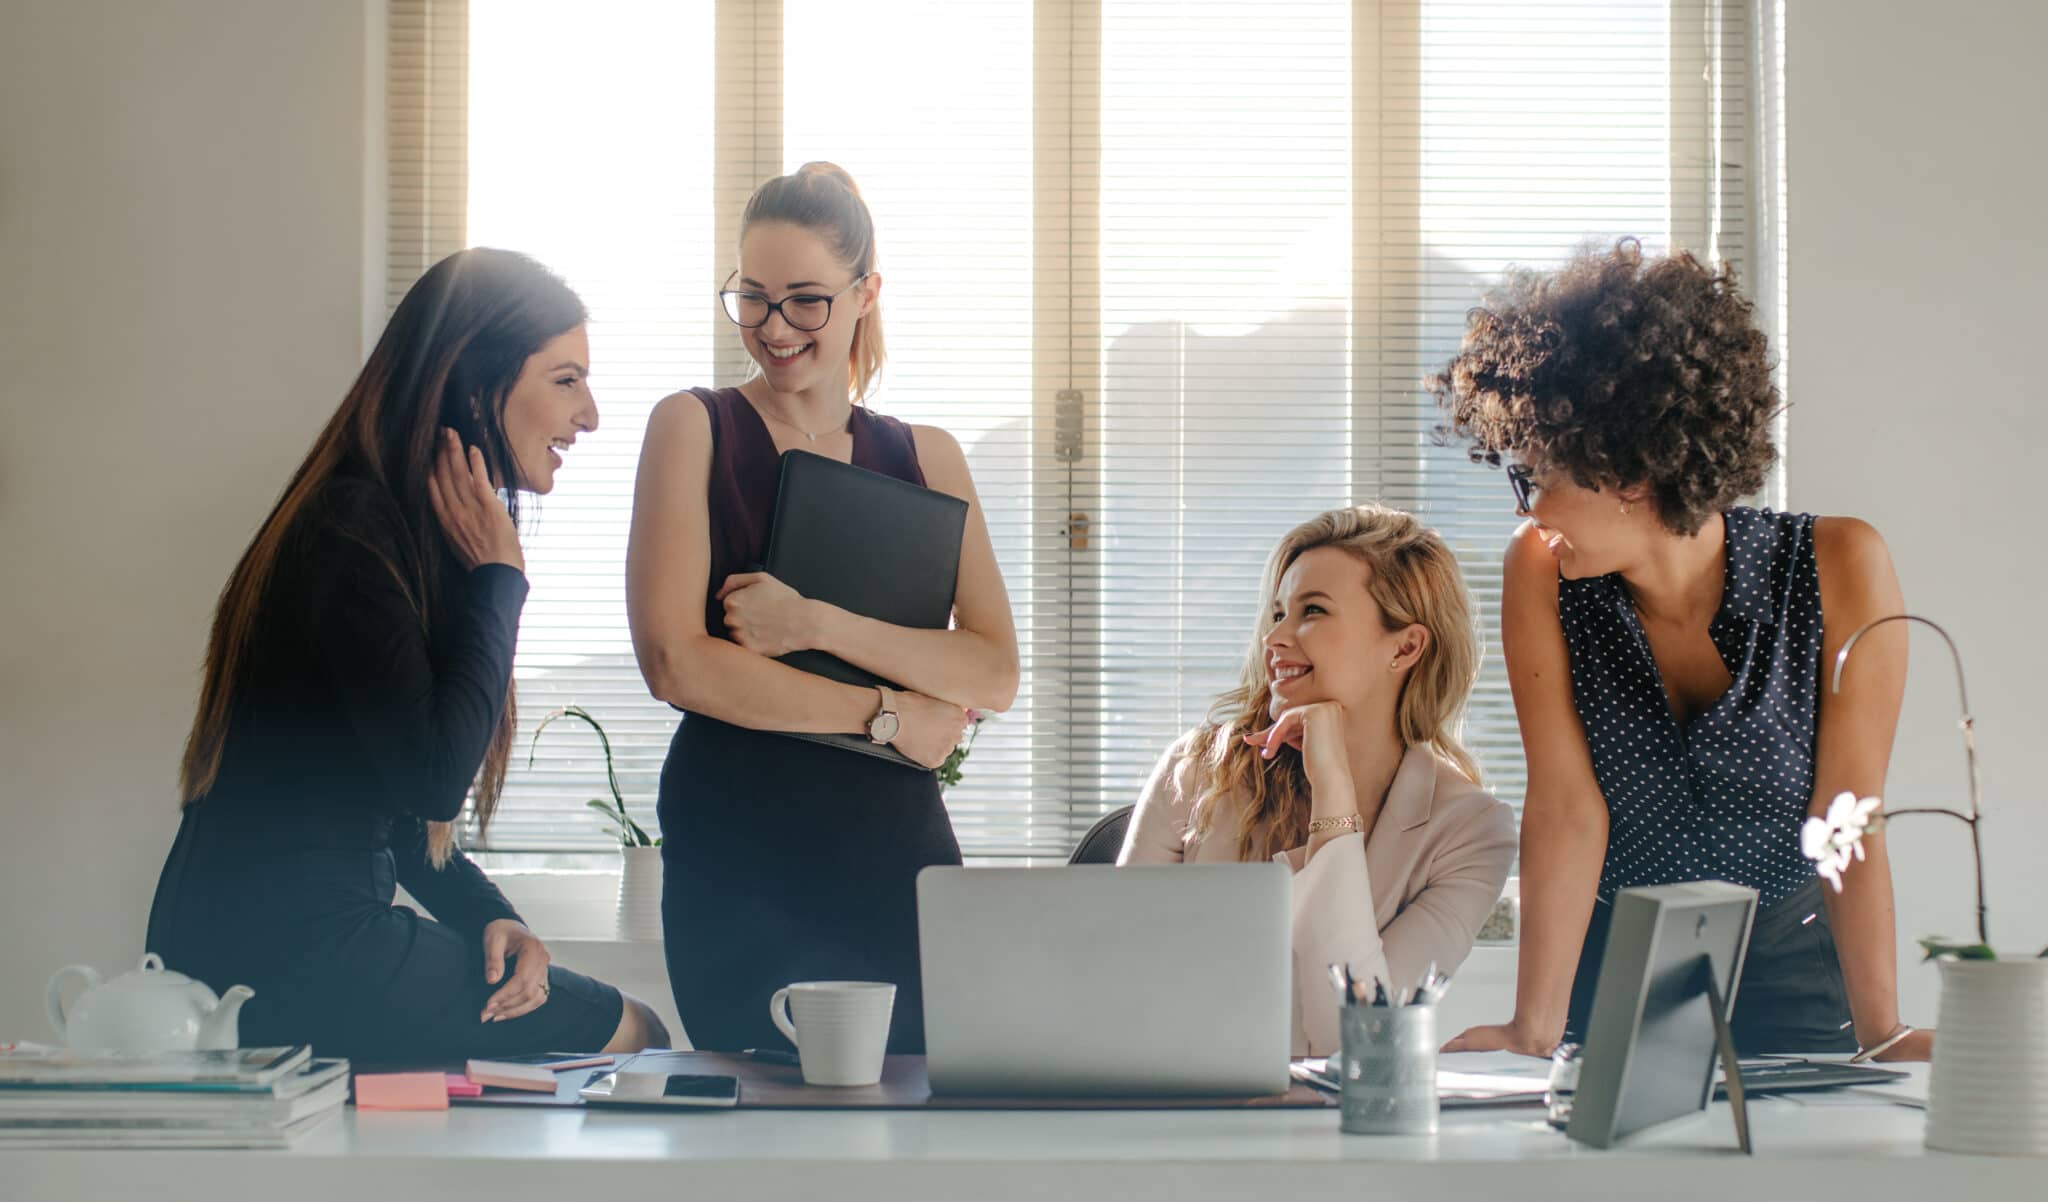 Group of multi-ethnic businesswoman having a casual discussion in office. Group of four women talking during work break in office.